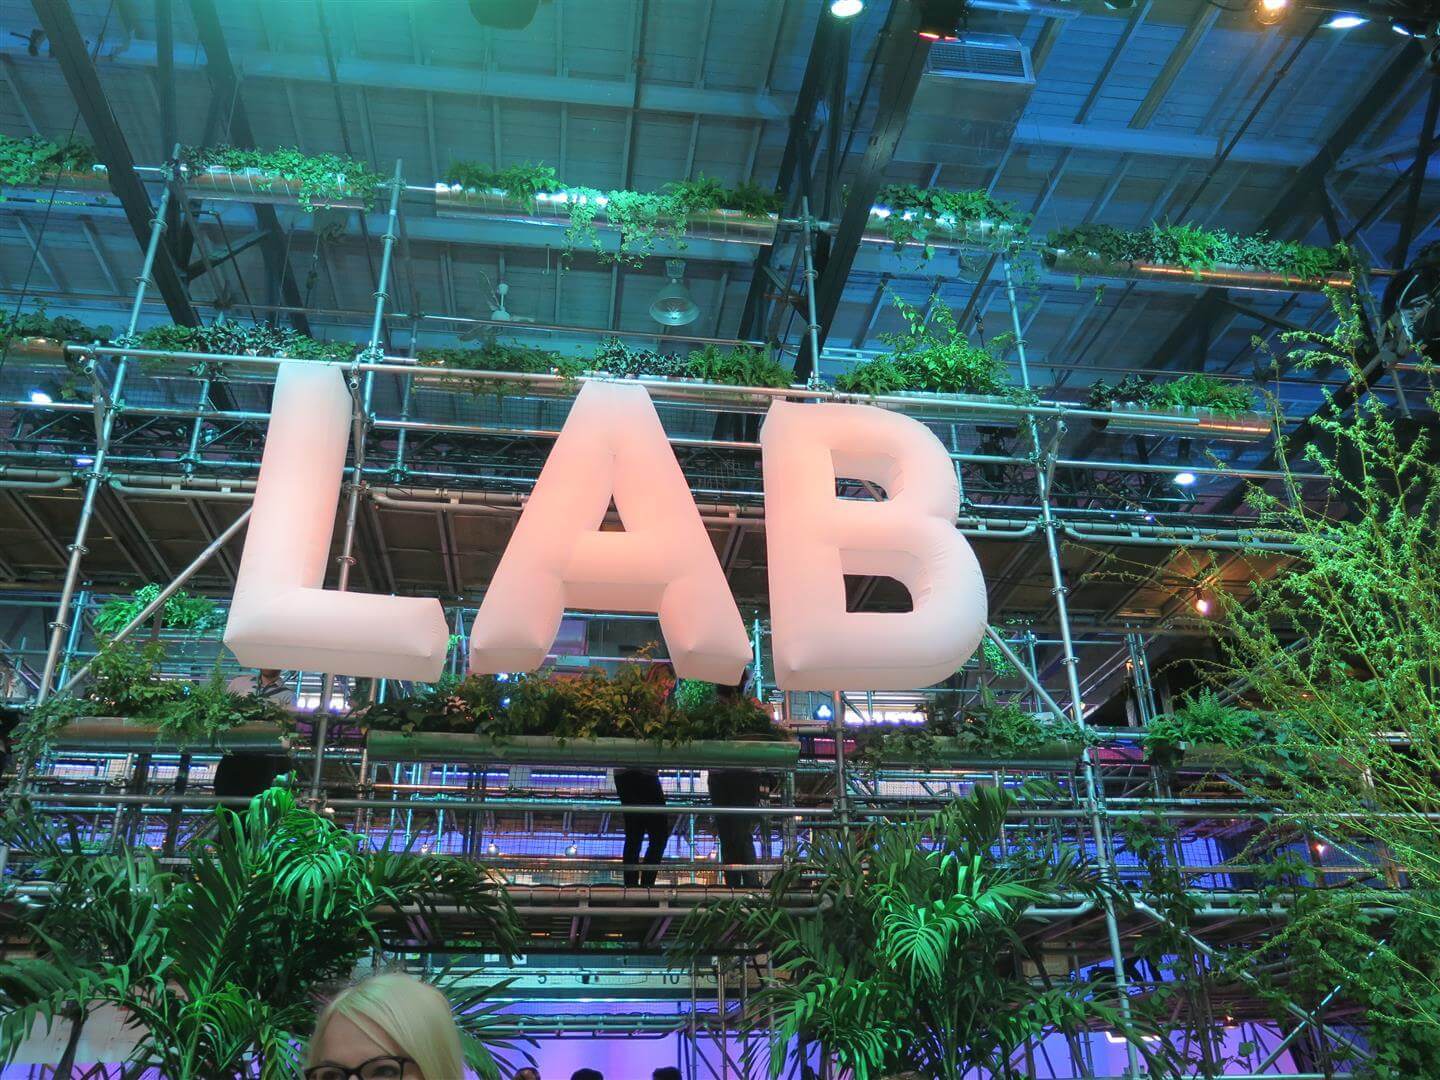 Game changers and industry shakers: Lessons from C2 MTL